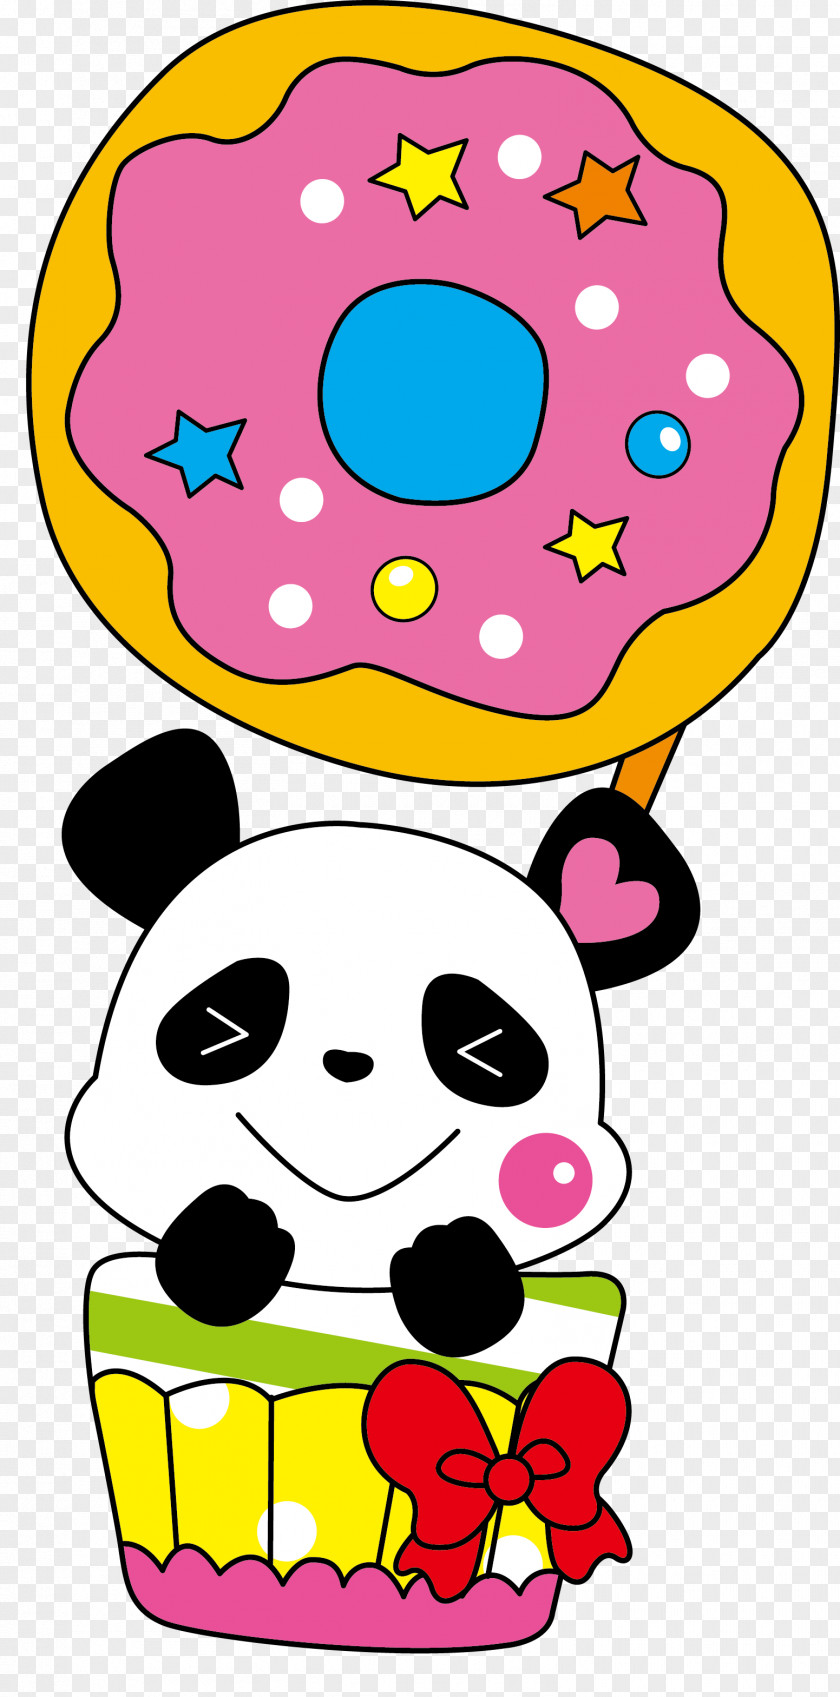 Panda Vector Giant Red Cuteness Illustration PNG